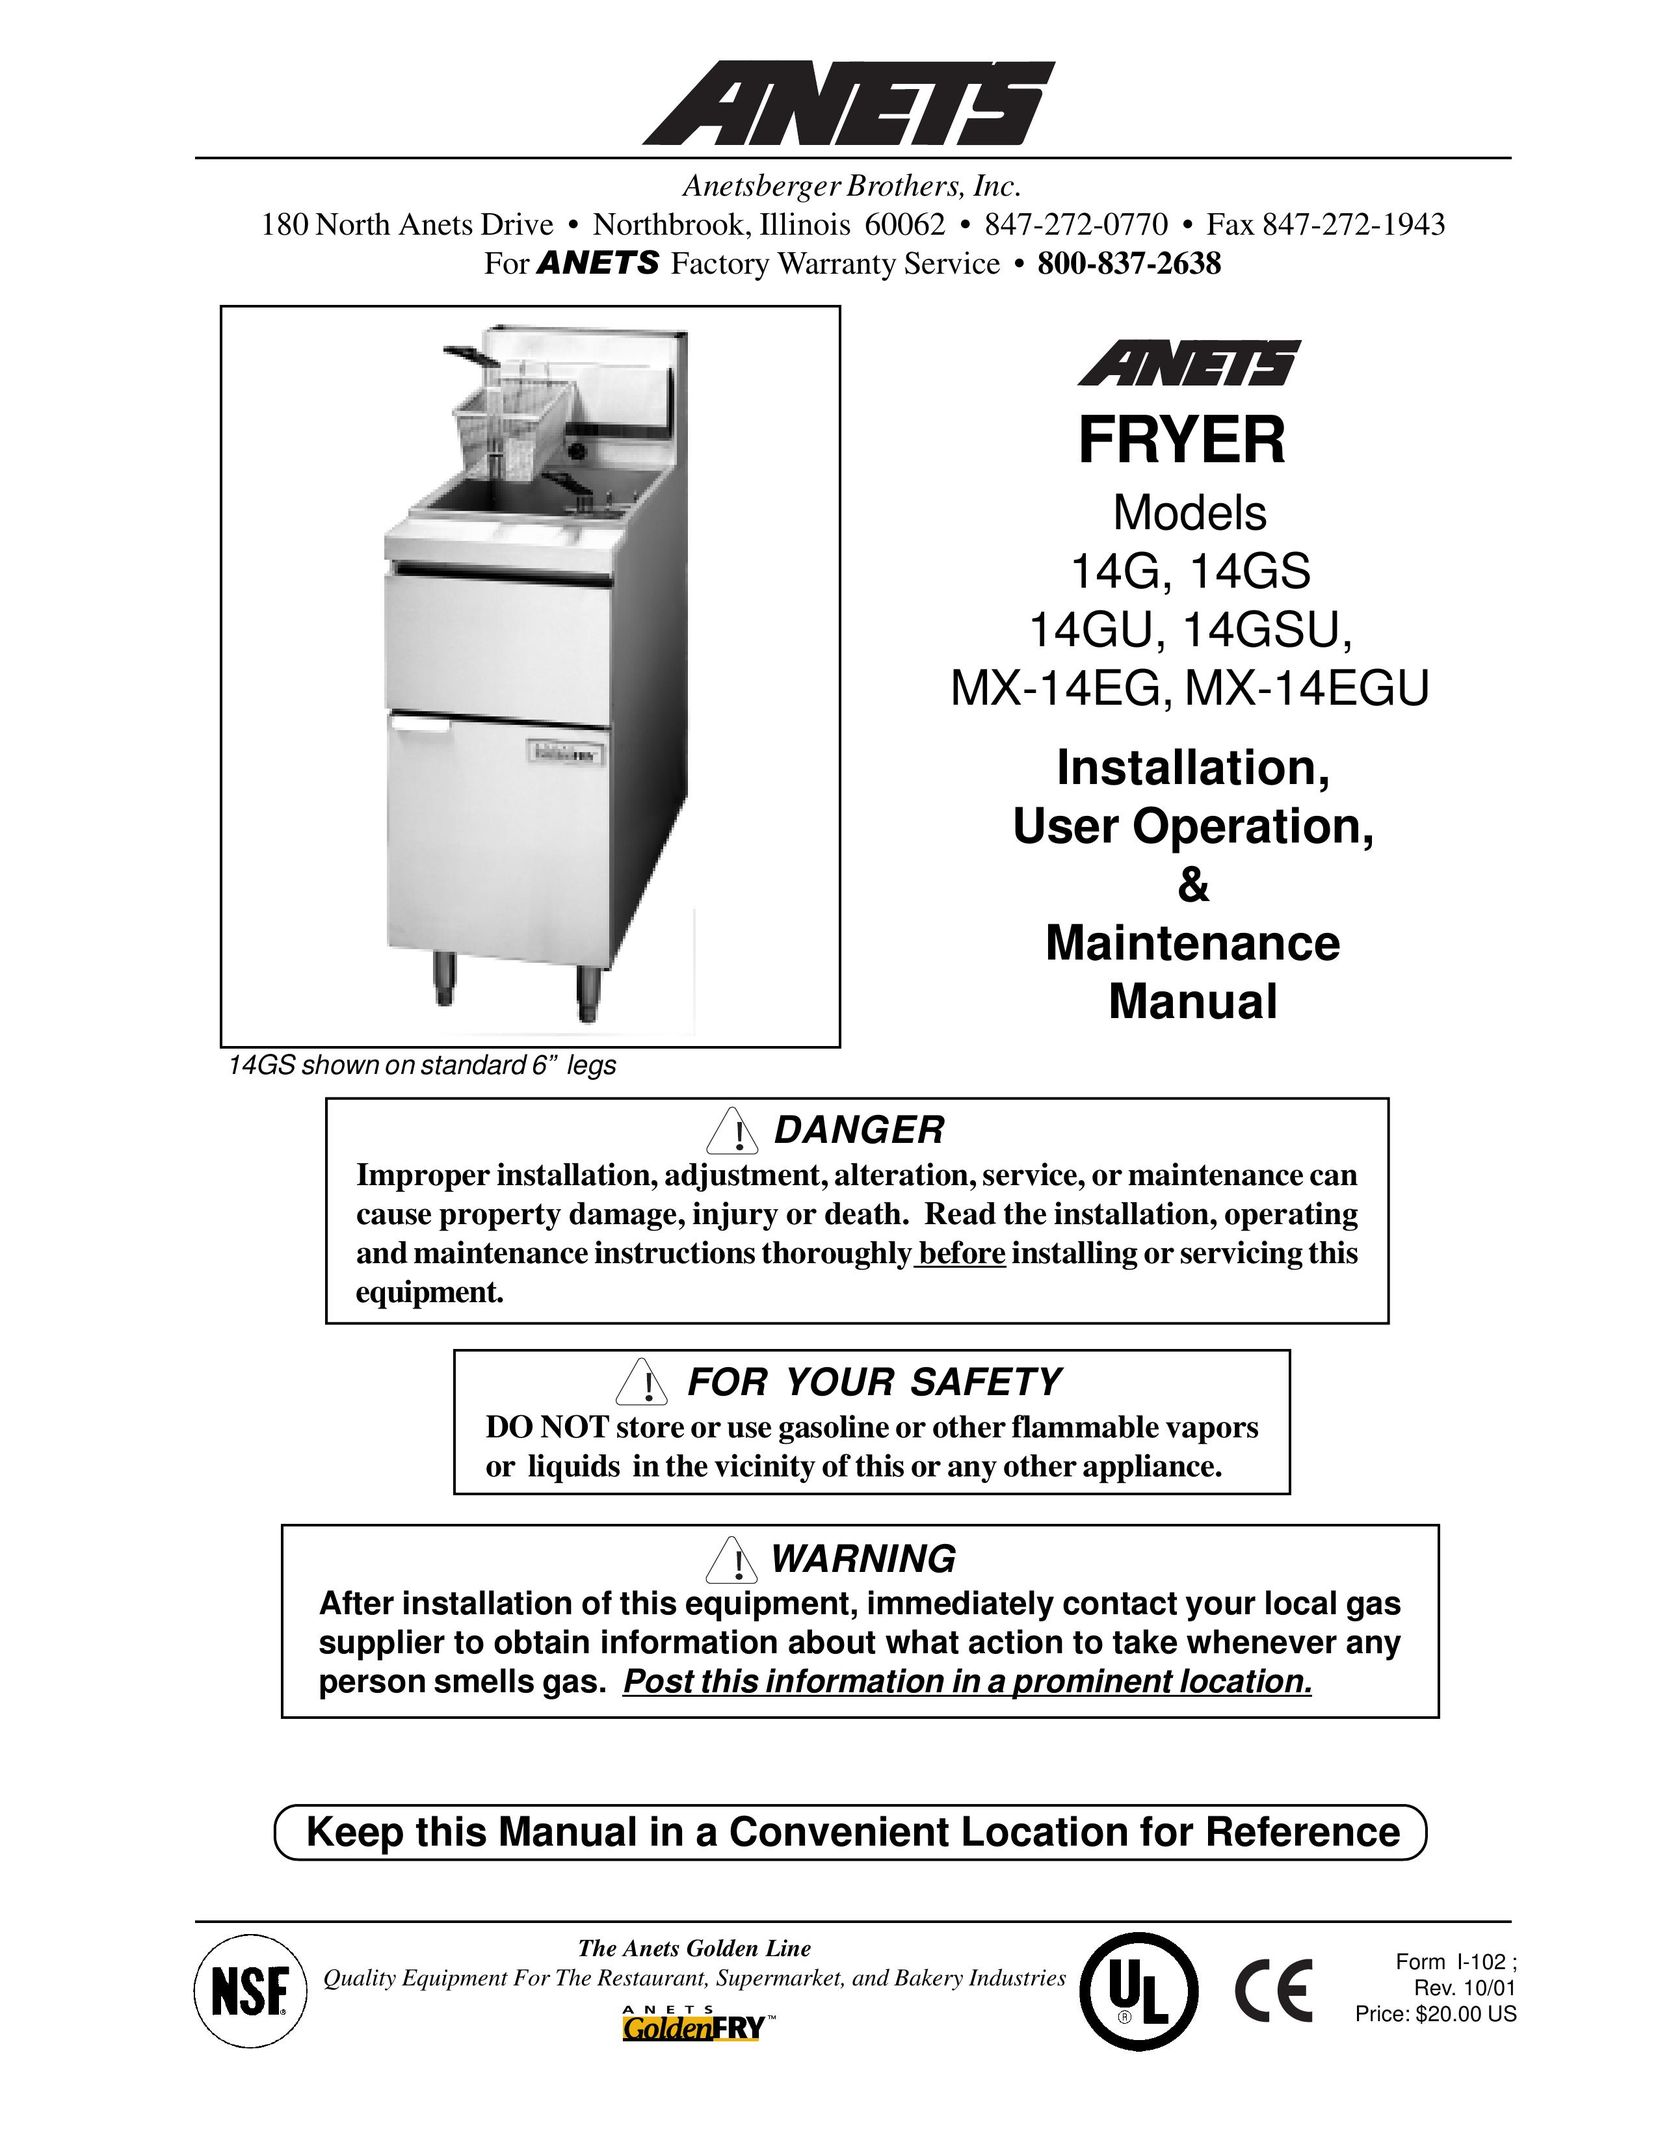 Anetsberger Brothers 14G Fryer User Manual